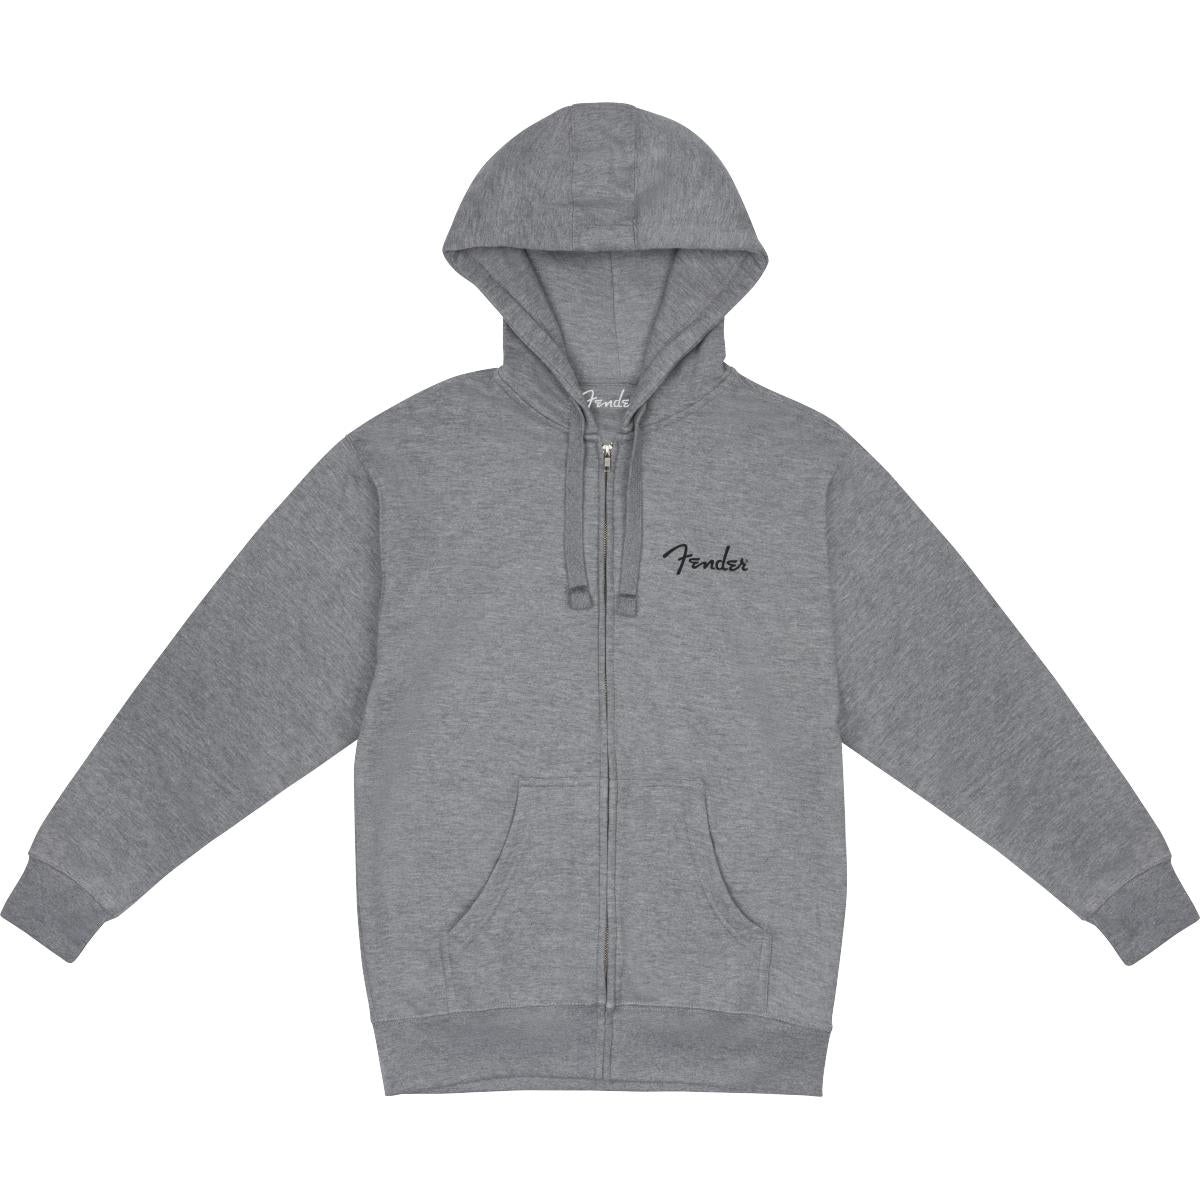 Fender Spaghetti Small Logo Zip Front Hoodie Athletic Gray L - 9113300506